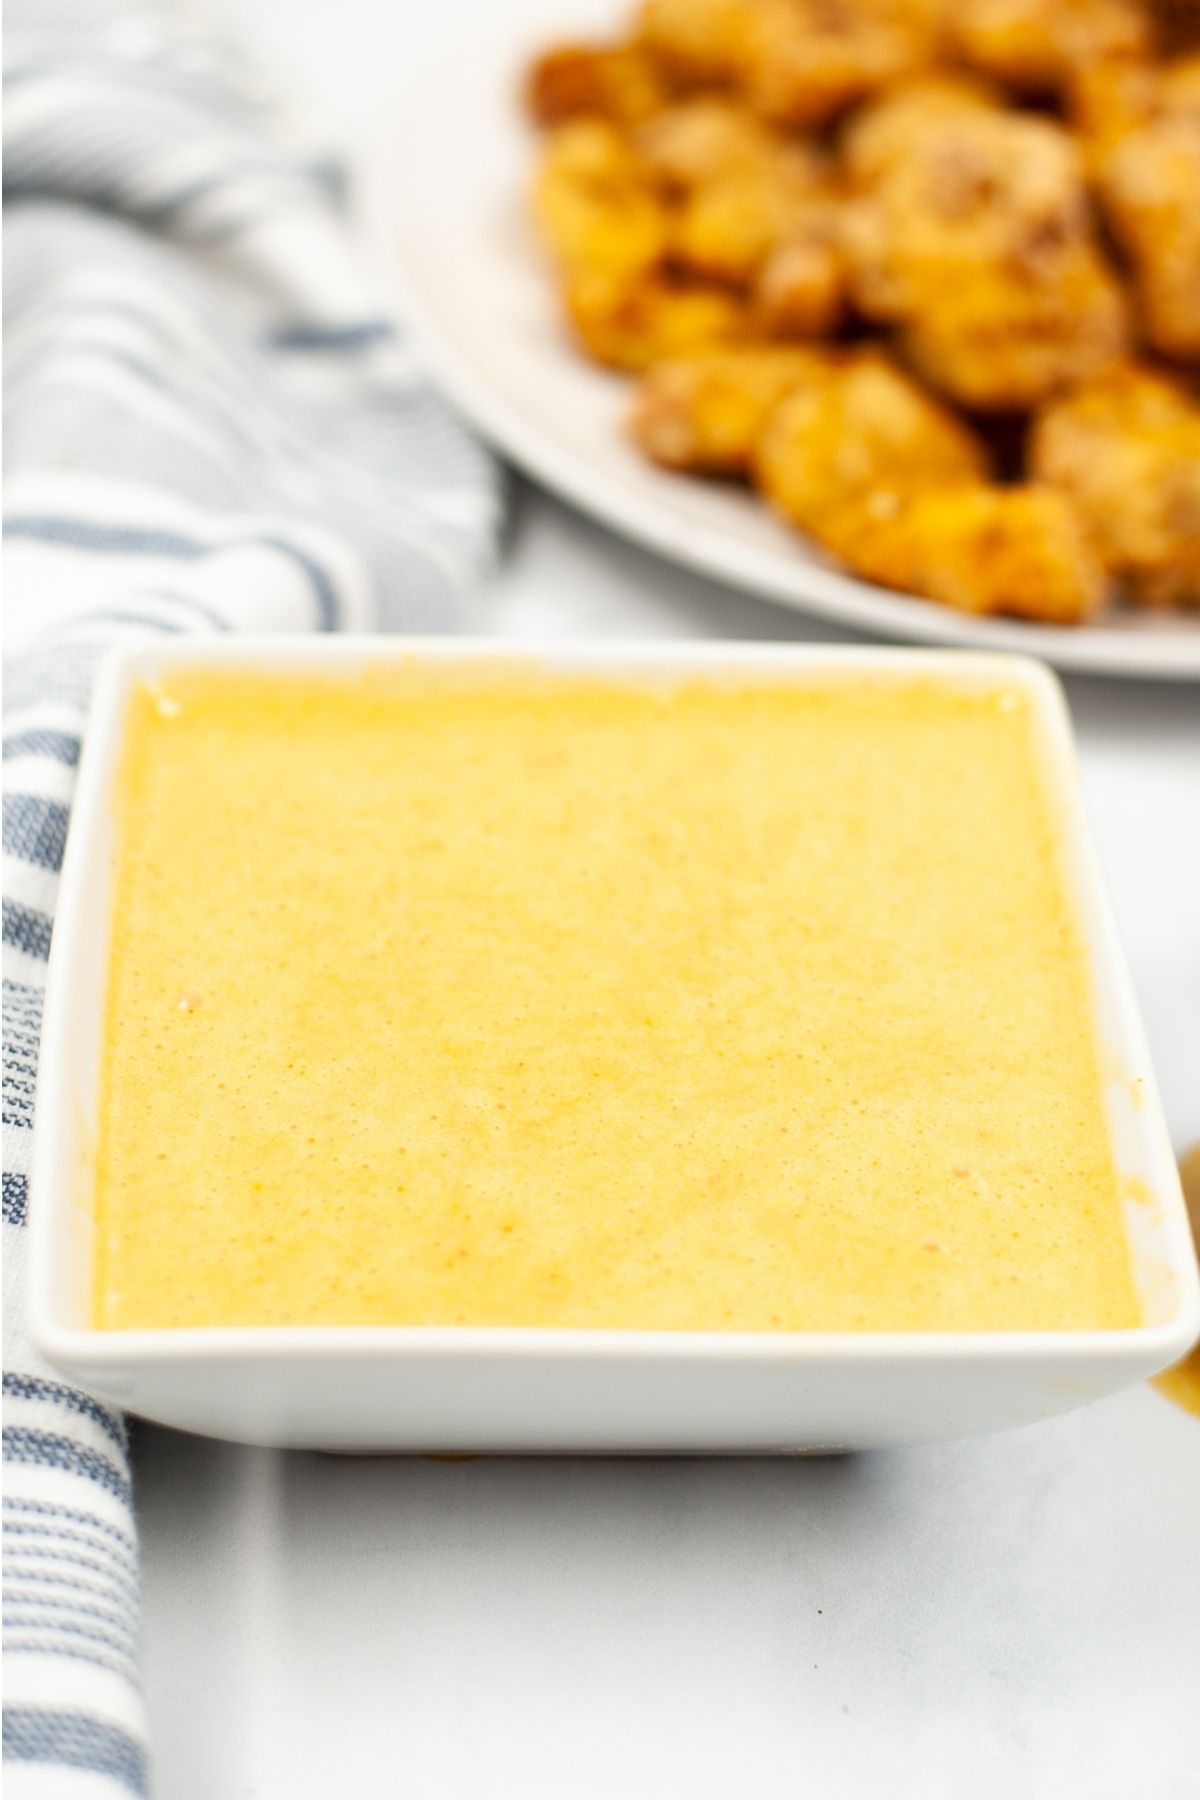 square bowl of yellow Chick-fil-a sauce with plate of Chick-fil-a nuggets on the side